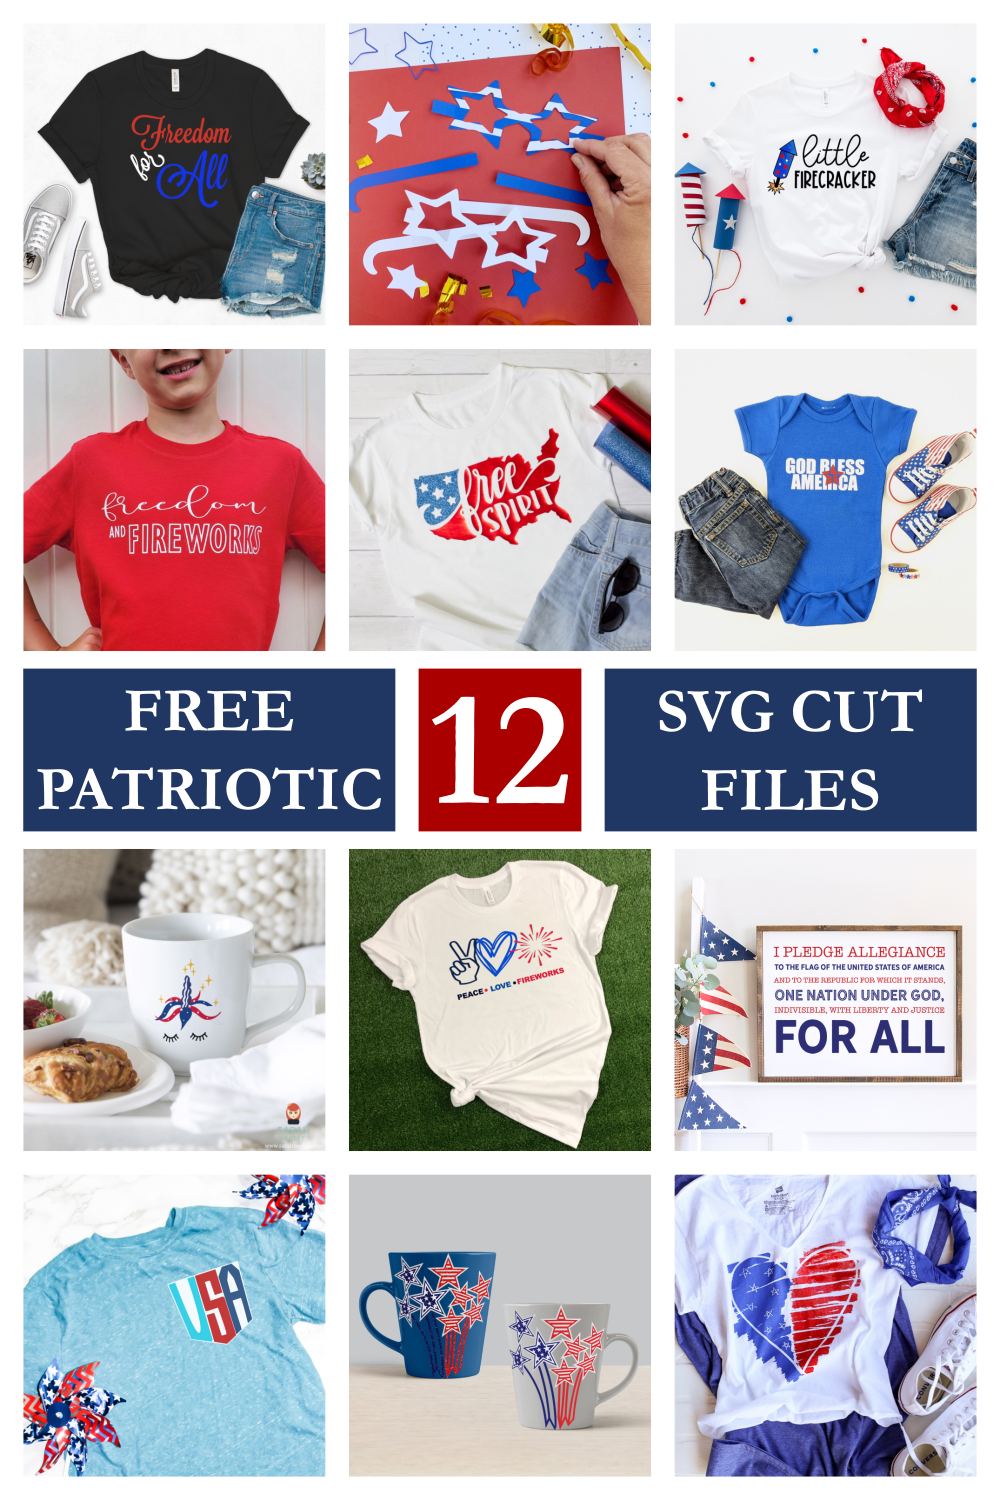 12 FREE Patriotic SVG Cut Files for personal use. Click here to see where you can get each one and get crafting for your 4th of July craft projects.